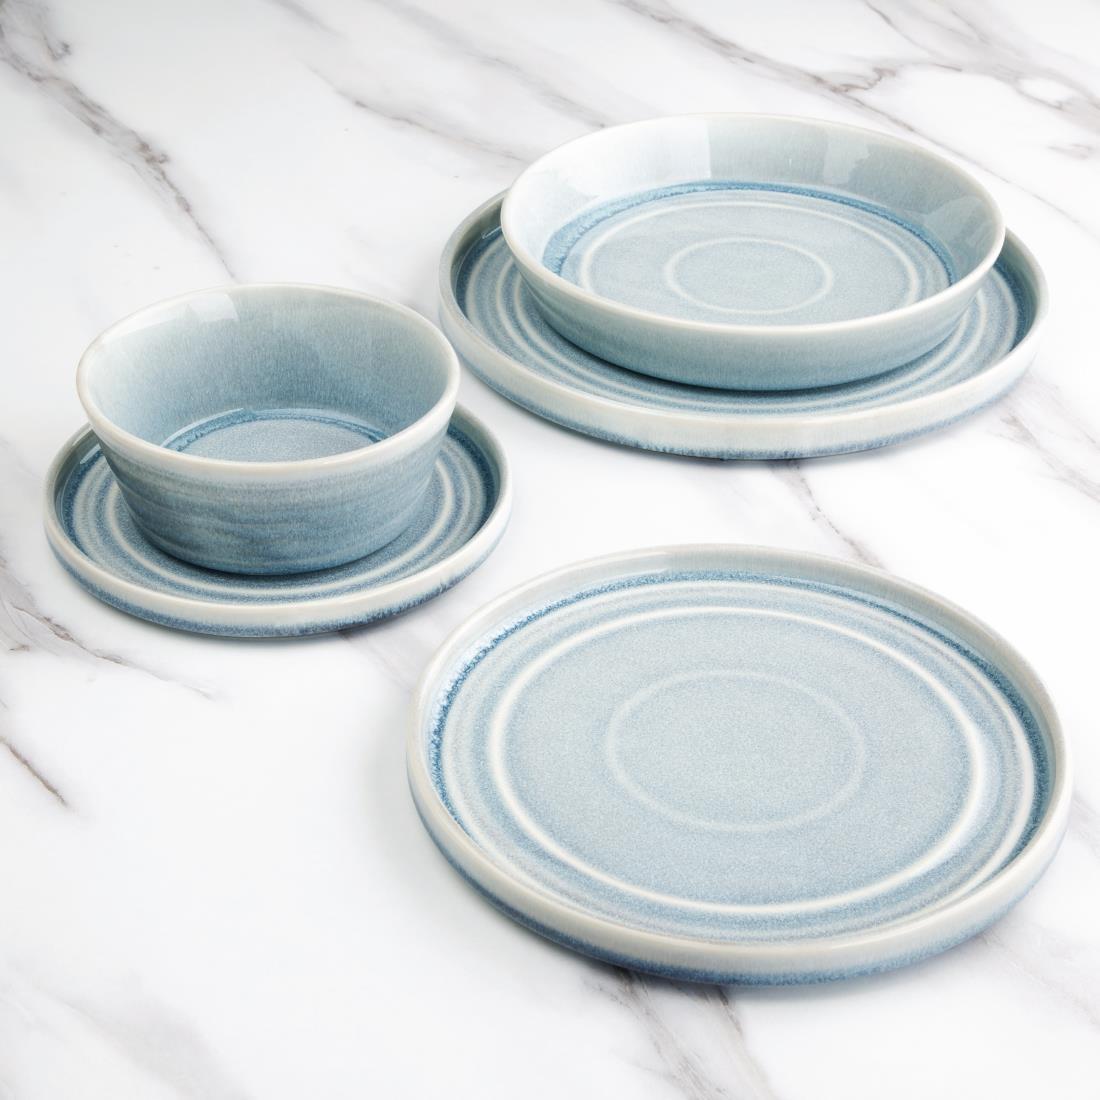 Olympia Cavolo Flat Round Plates Ice Blue 270mm (Pack of 4) - FB569  - 5